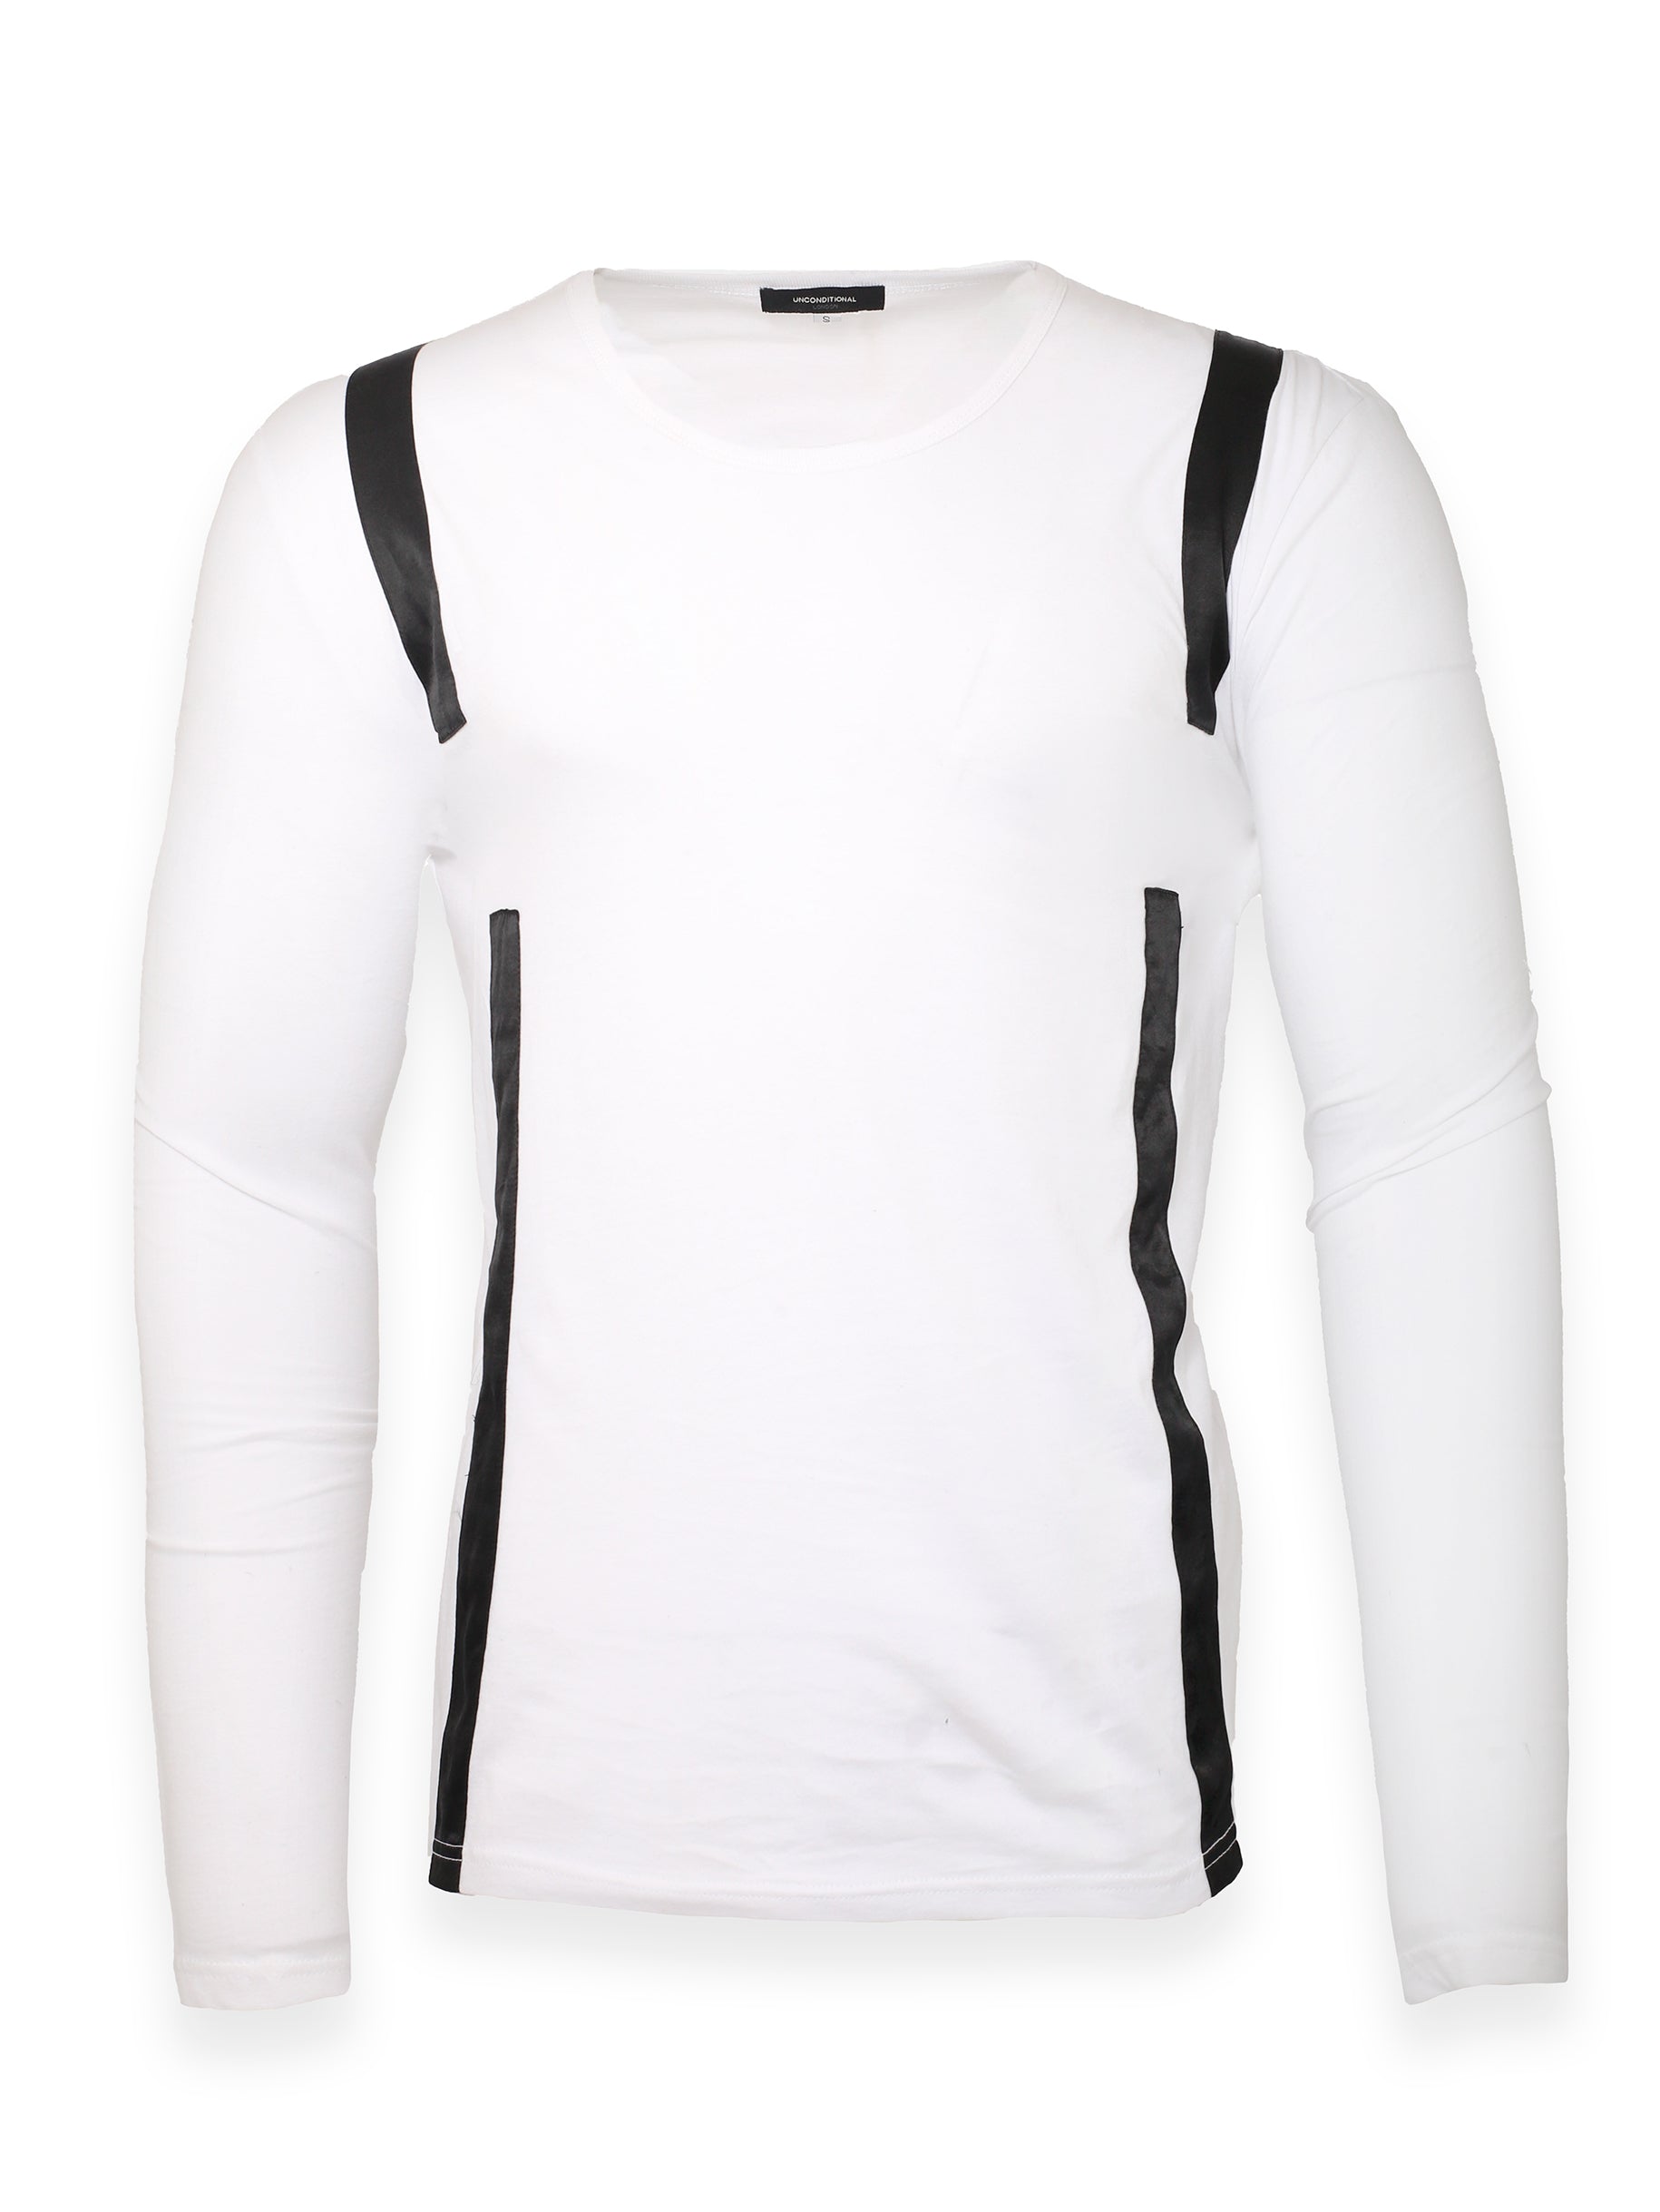 White T-Shirt with Black Details